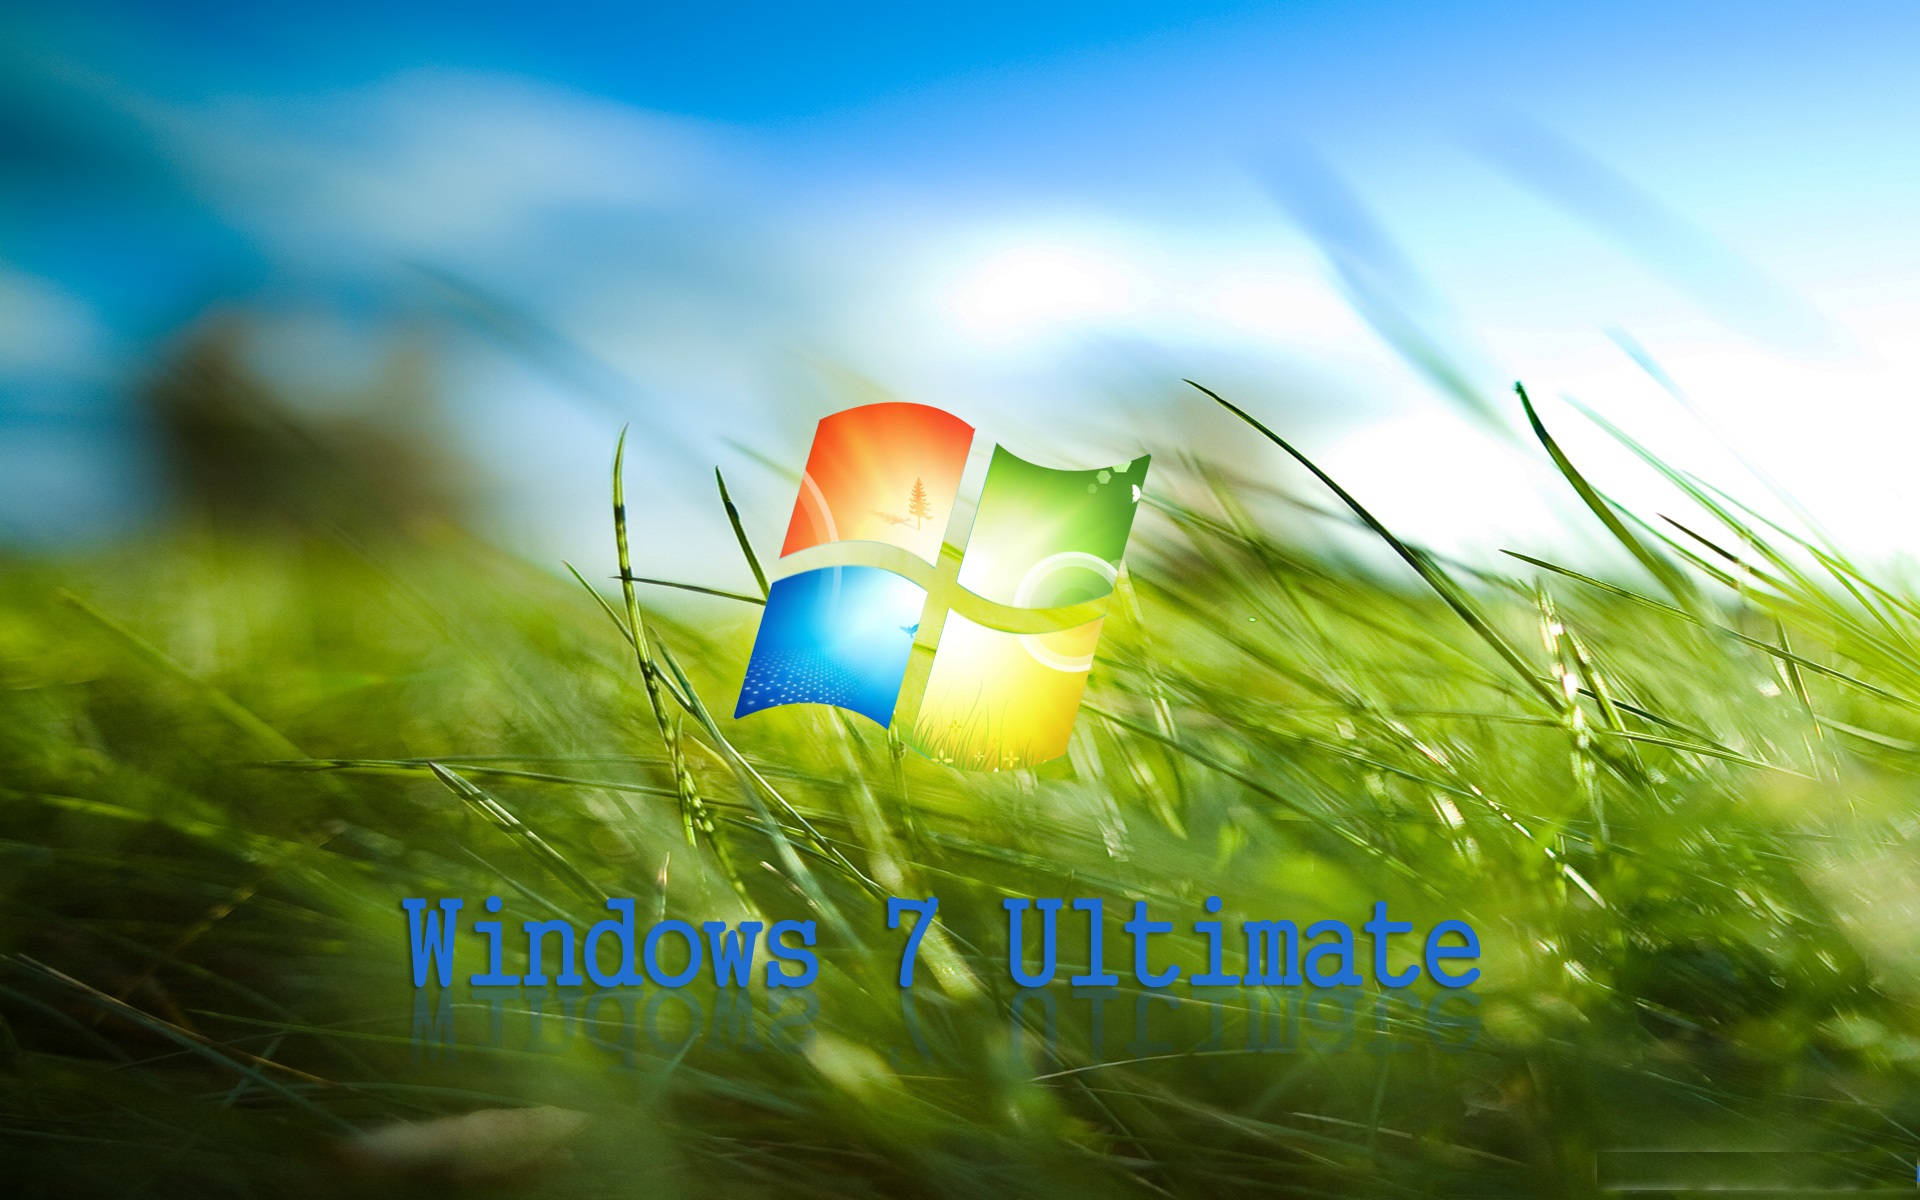 Post Windows Ultimate HD Wallpaper Appeared First On